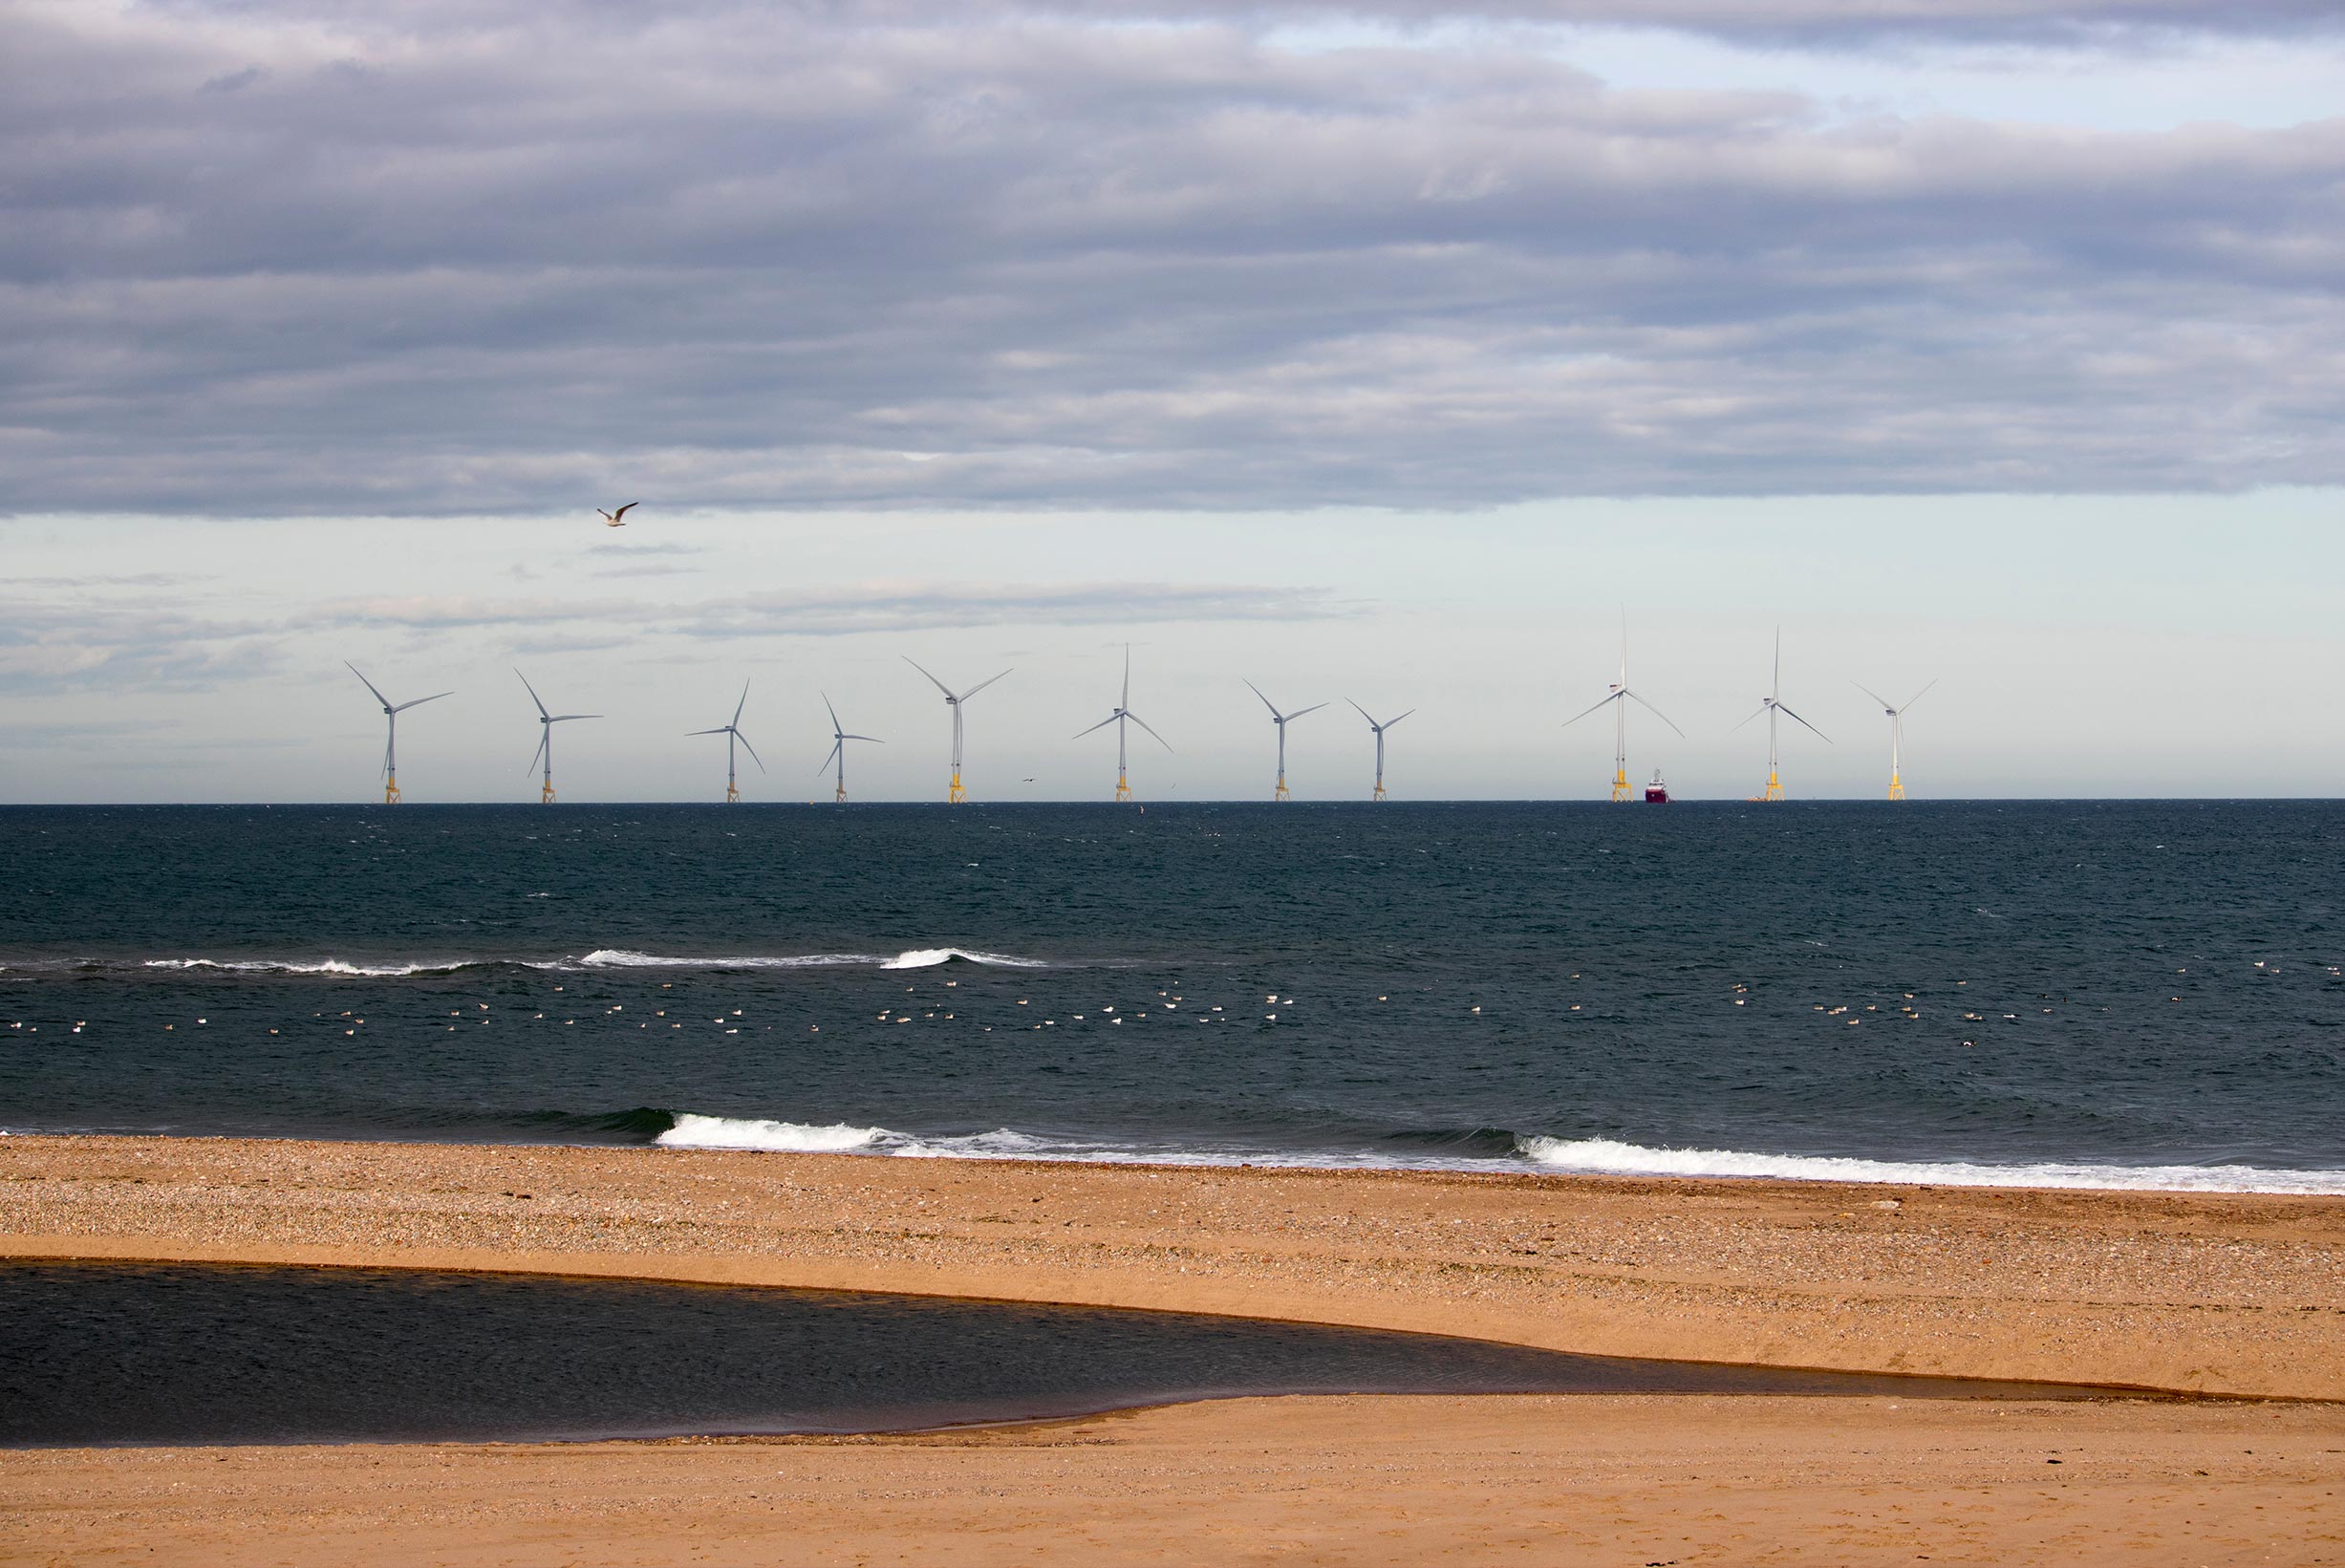 A photo of an offshore wind farm taken from shore